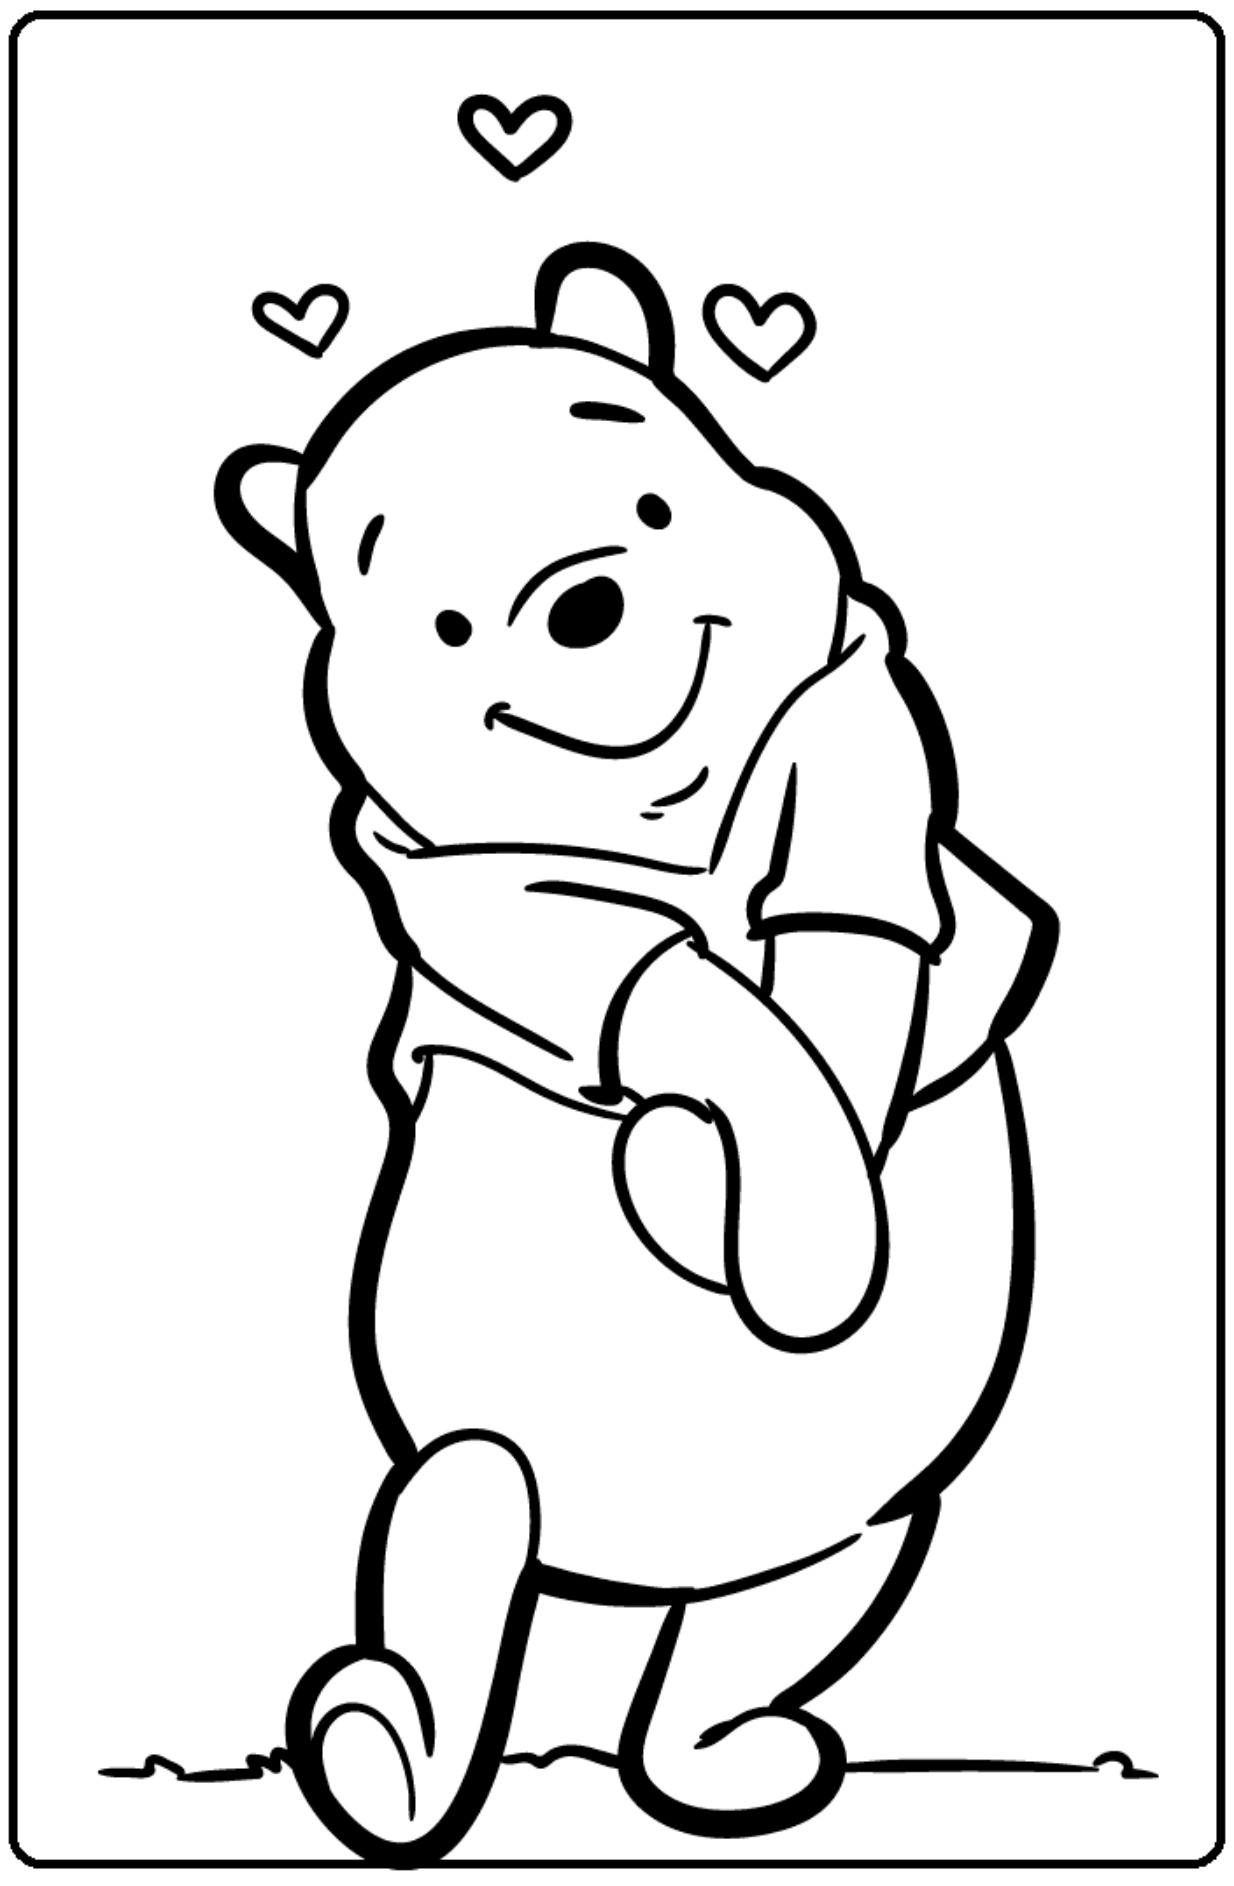 Printable Winnie the Pooh love hearts Coloring Page for kids.